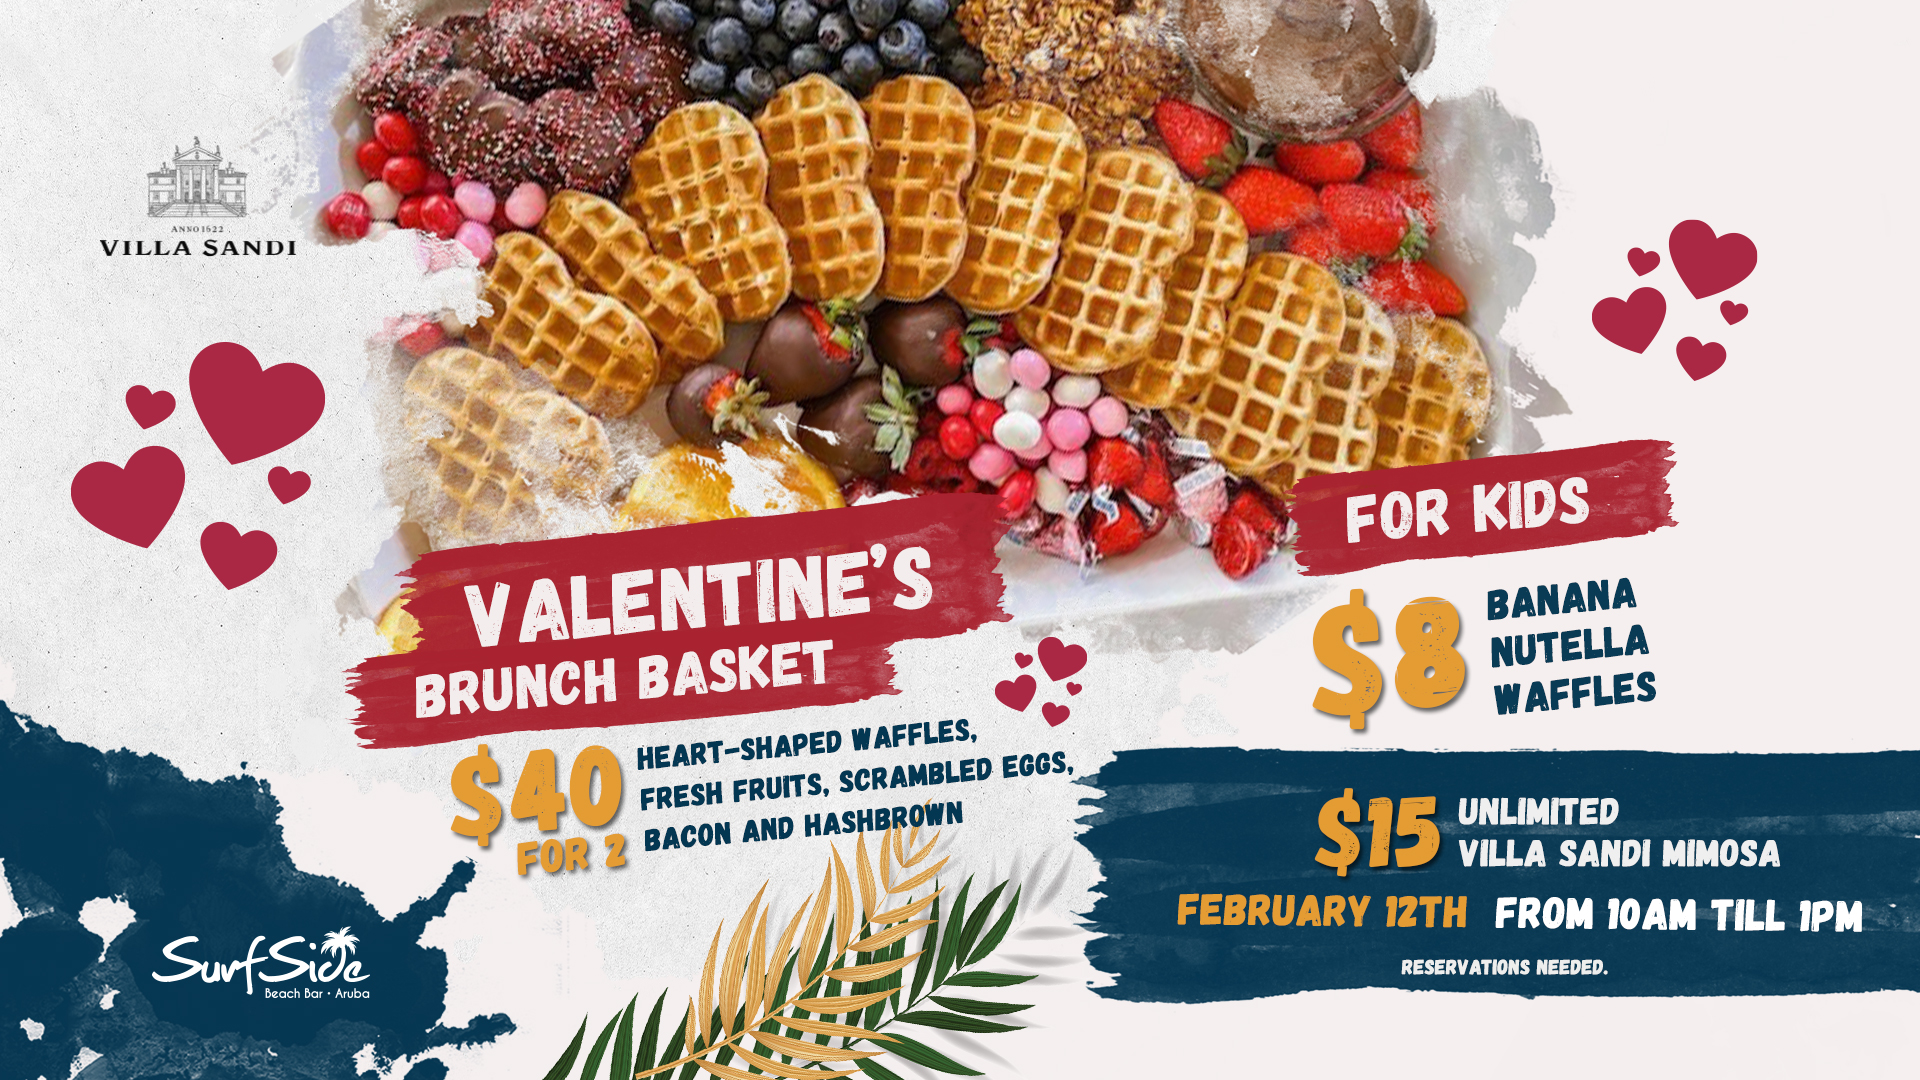 Celebrate your Valentine with a stunning postcard view accompanied by a delicious Valentine’s brunch basket! Surfside Beach Bar is offering a unique beachside experience